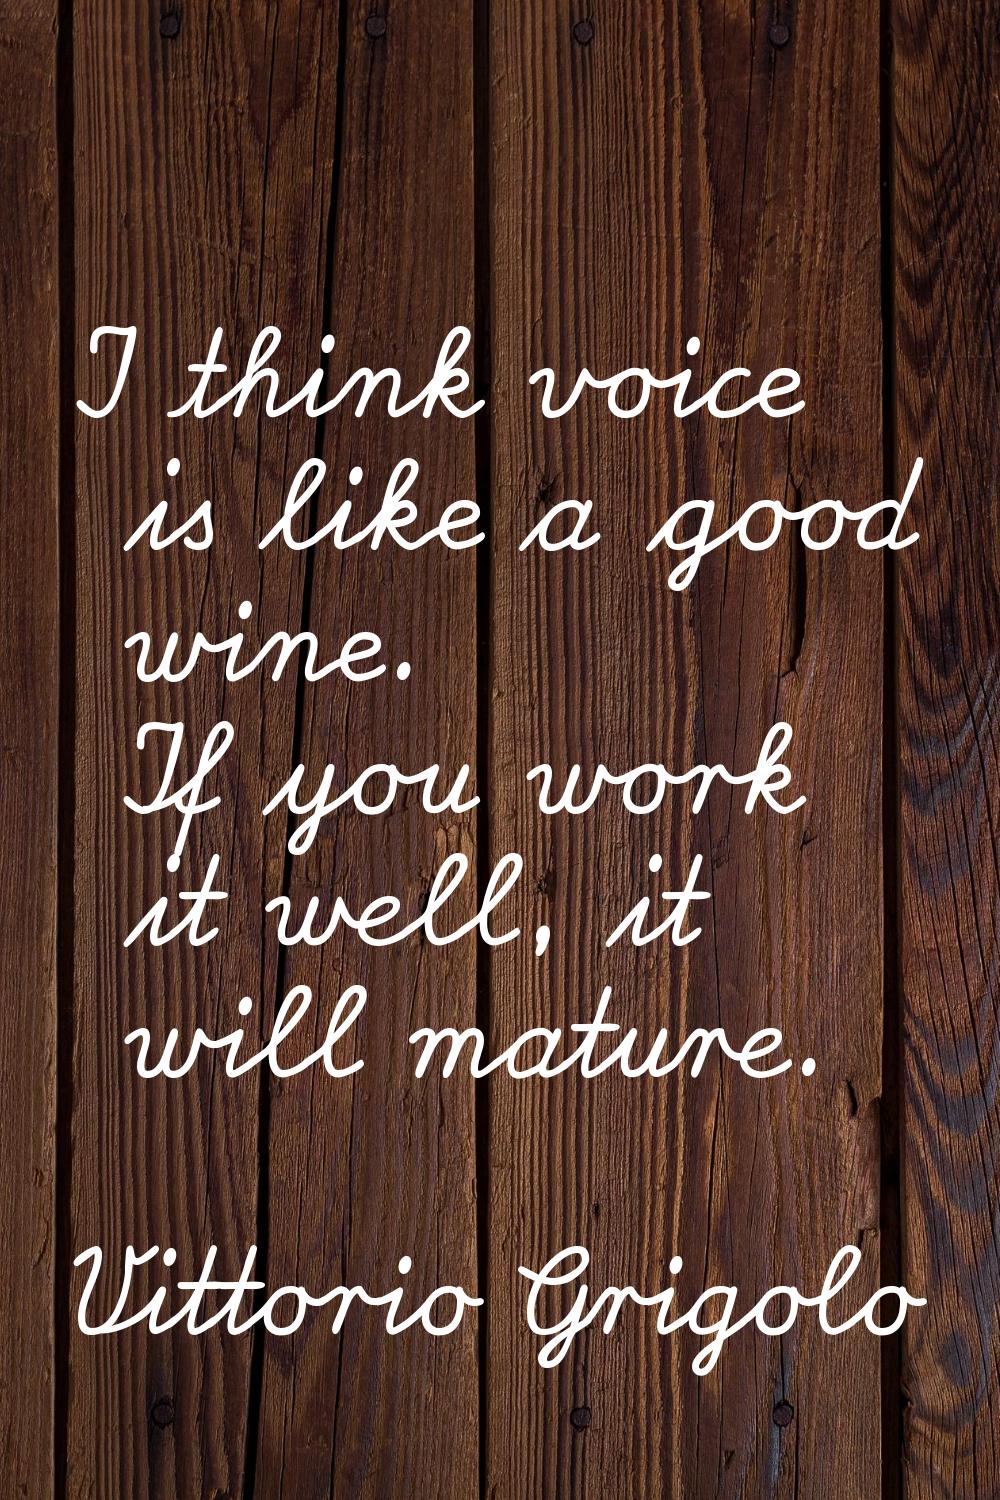 I think voice is like a good wine. If you work it well, it will mature.